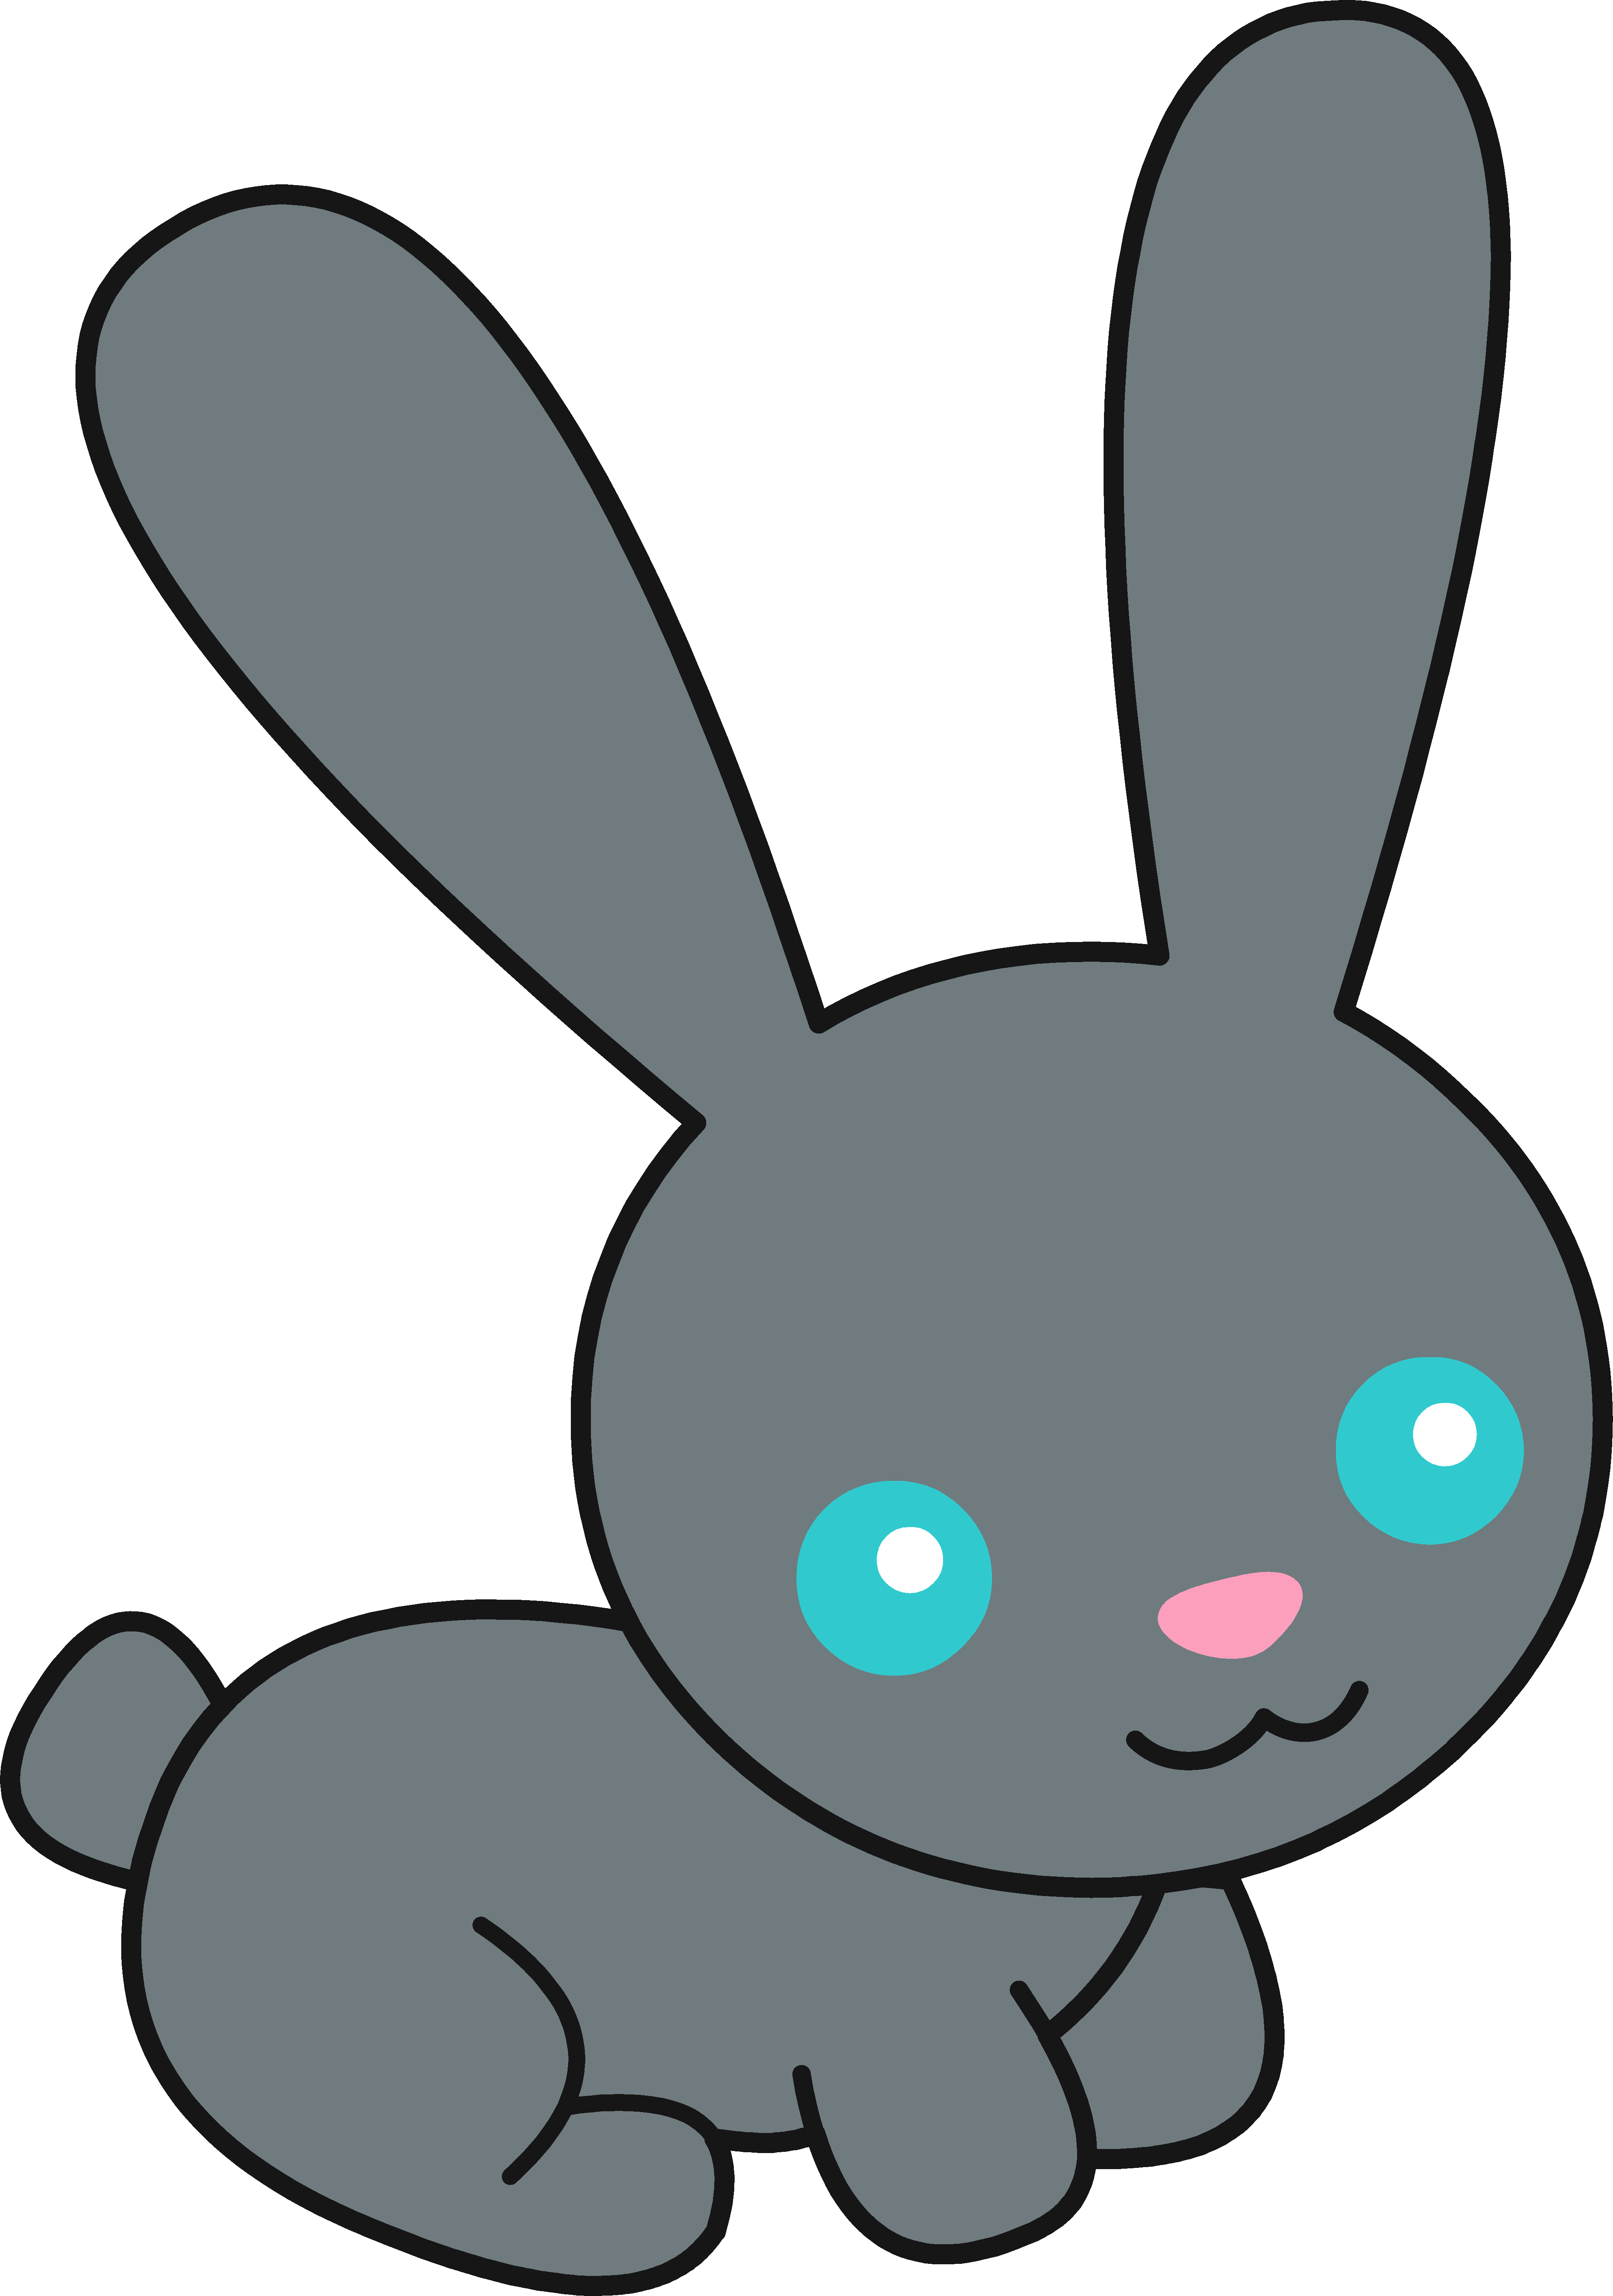 You can use this cute bunny .